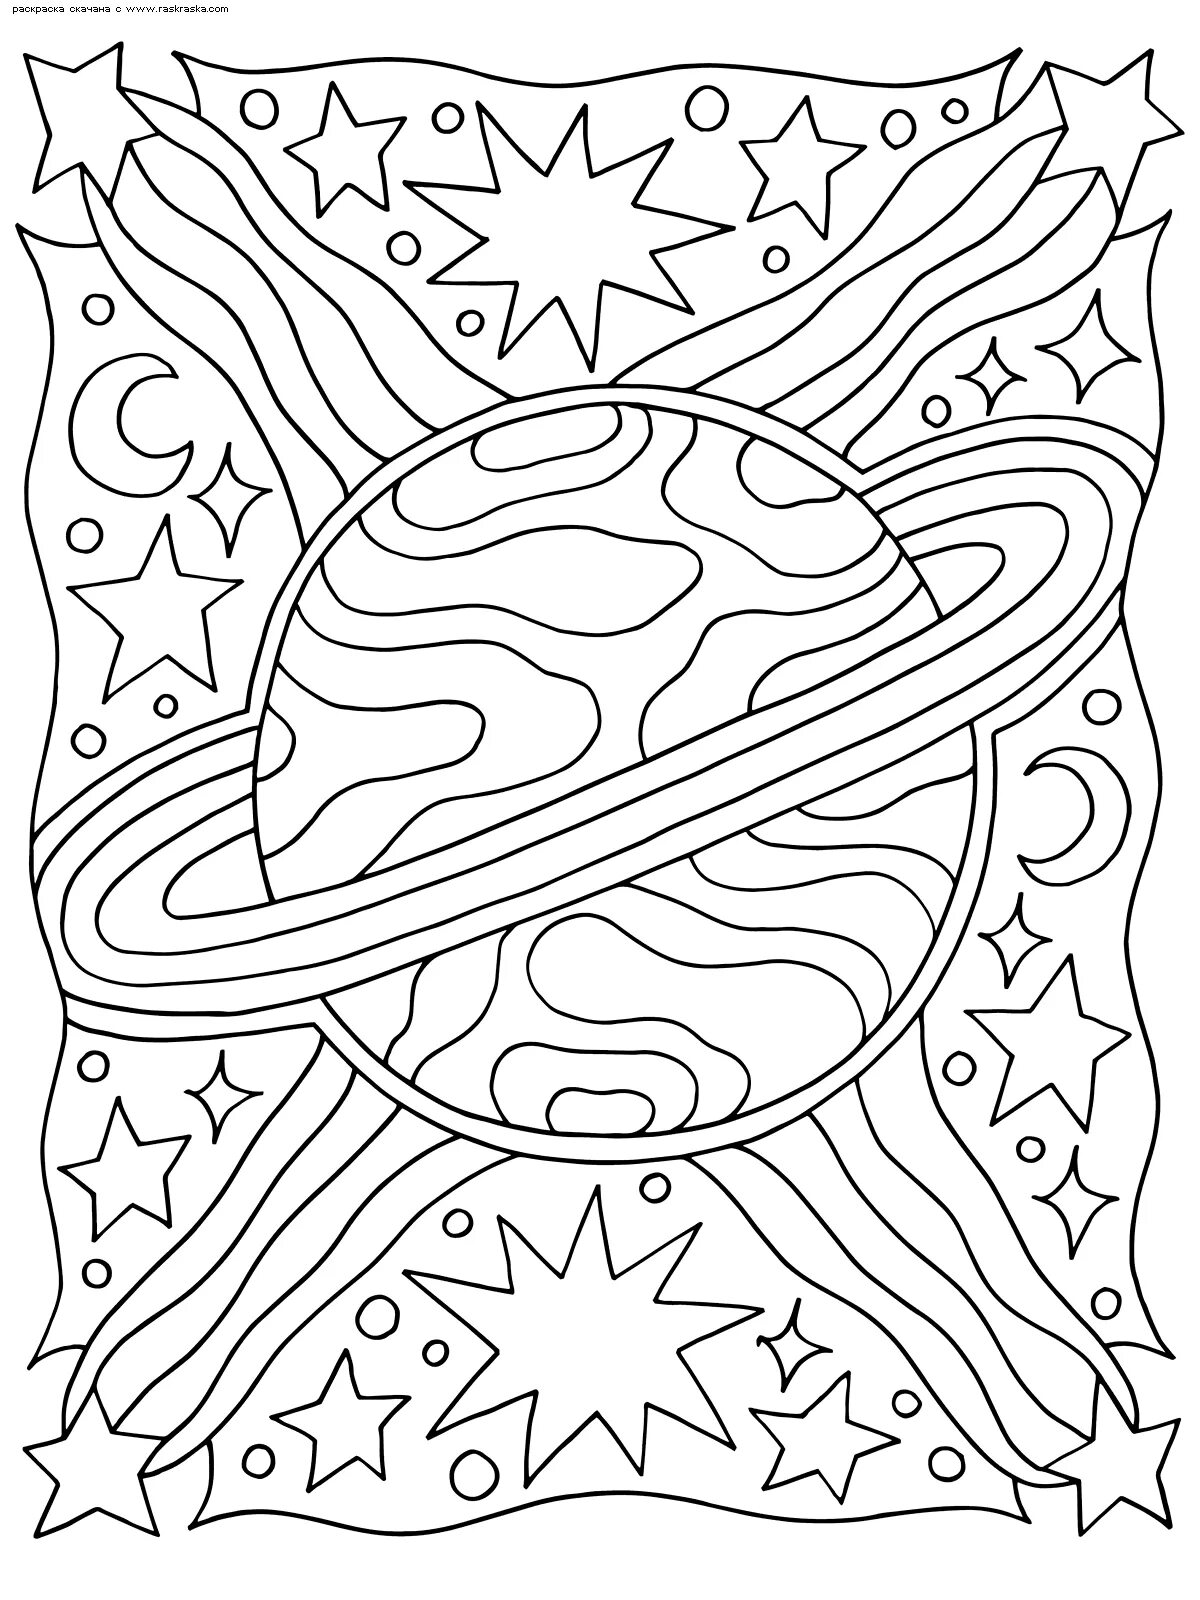 Coloring book beautiful space complex